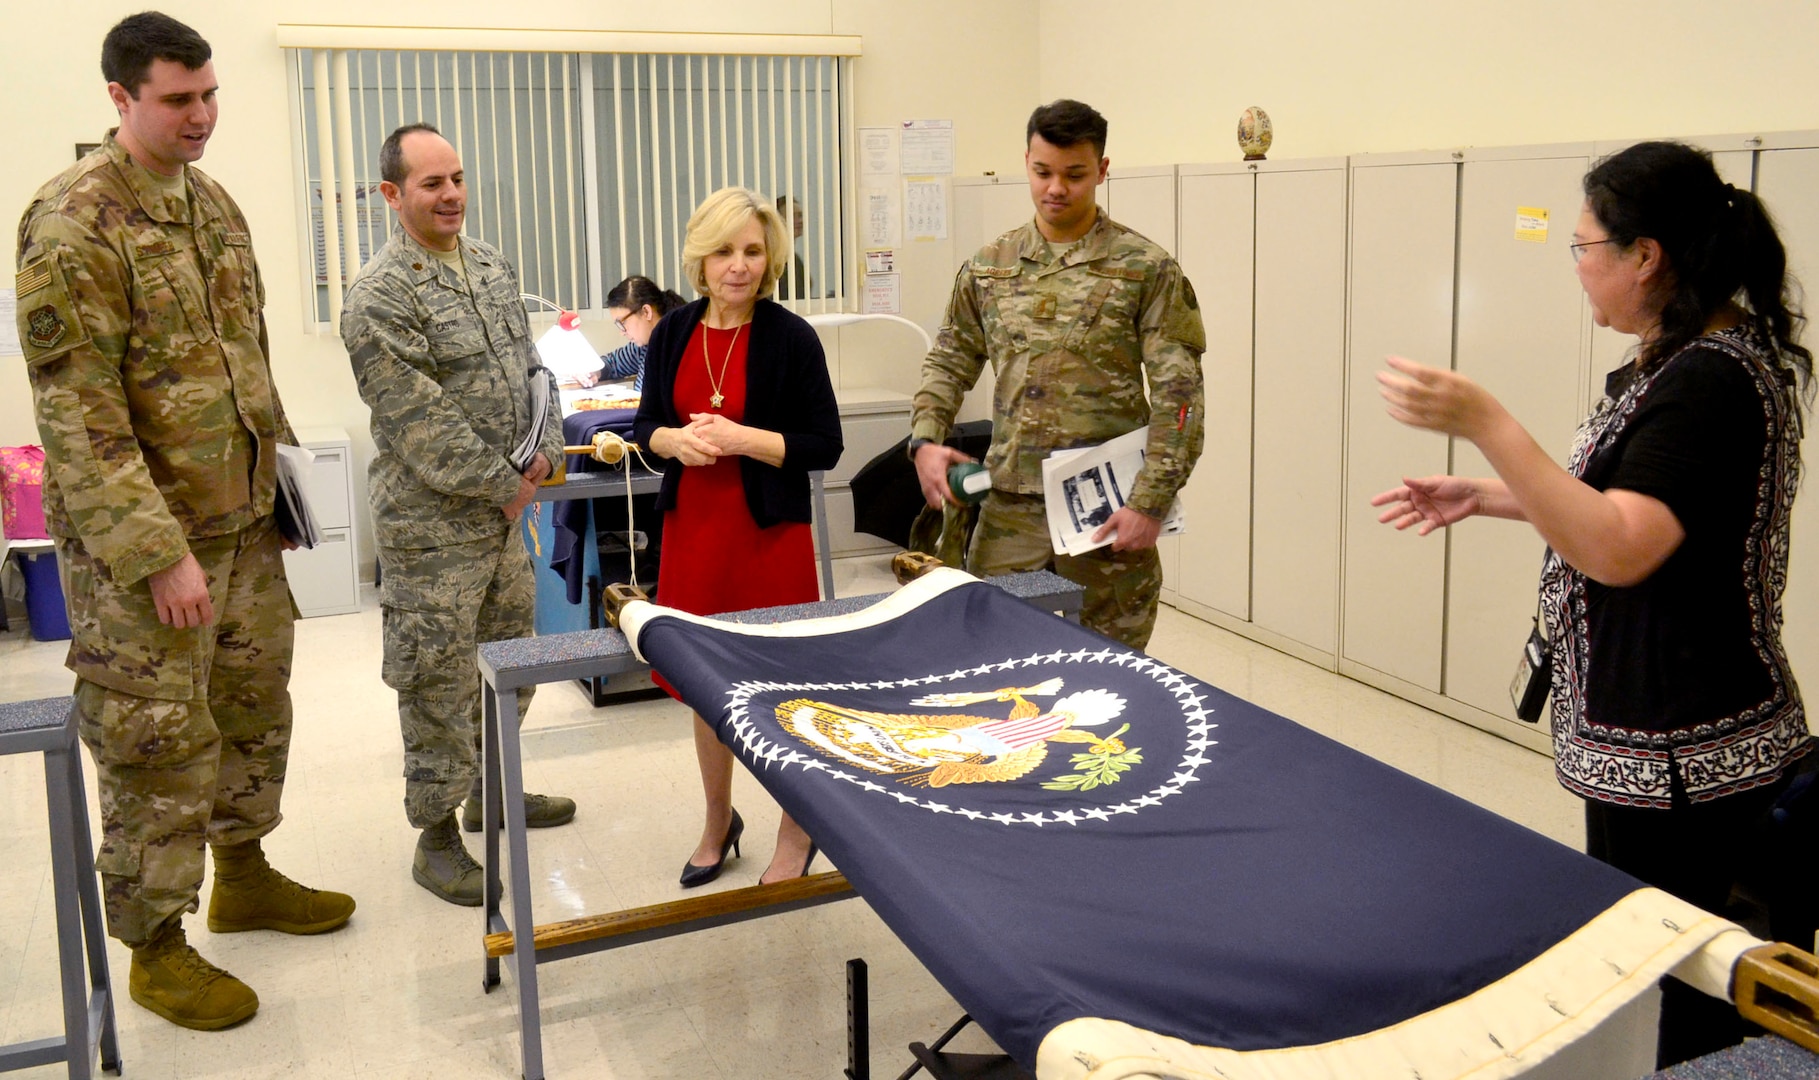 Visitors from the Logistics Officer Association’s Pudgy Chapter from Joint Base McGuire-Dix-Lakehurst view a nearly complete, hand embroidered presidential flag in DLA Troop Support’s flag room during a tour Jan. 24, 2019 in Philadelphia.